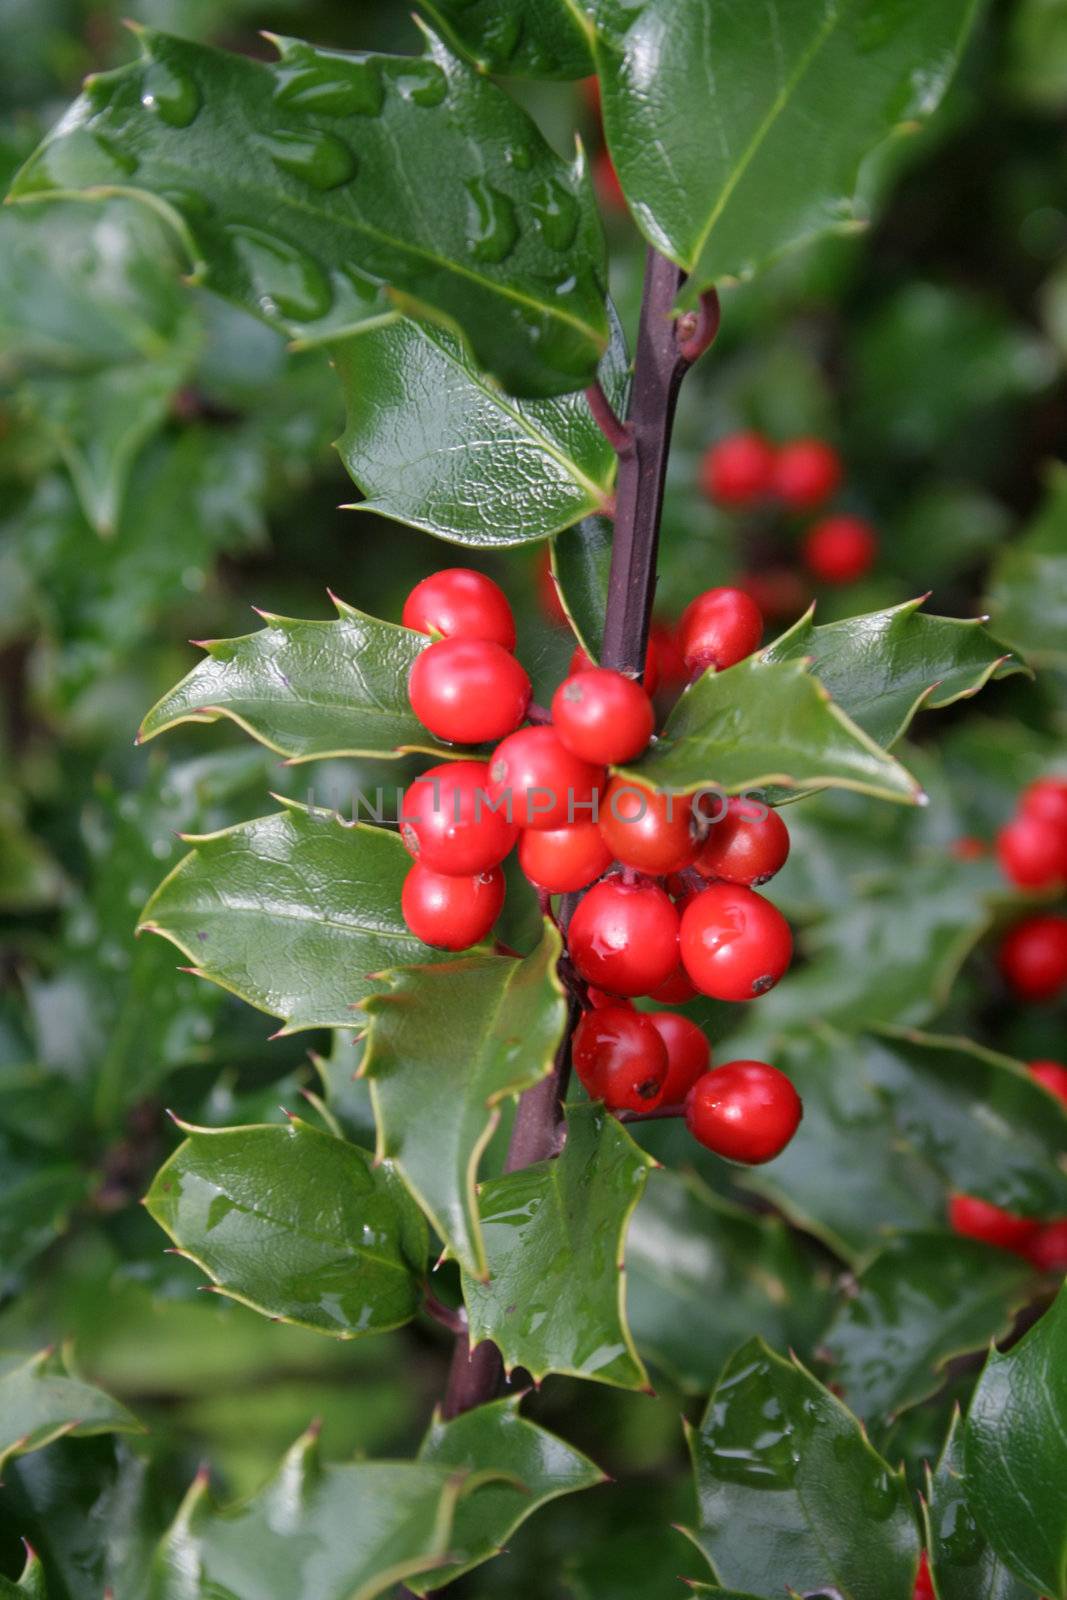 Wet holly berries on a holly bush.
